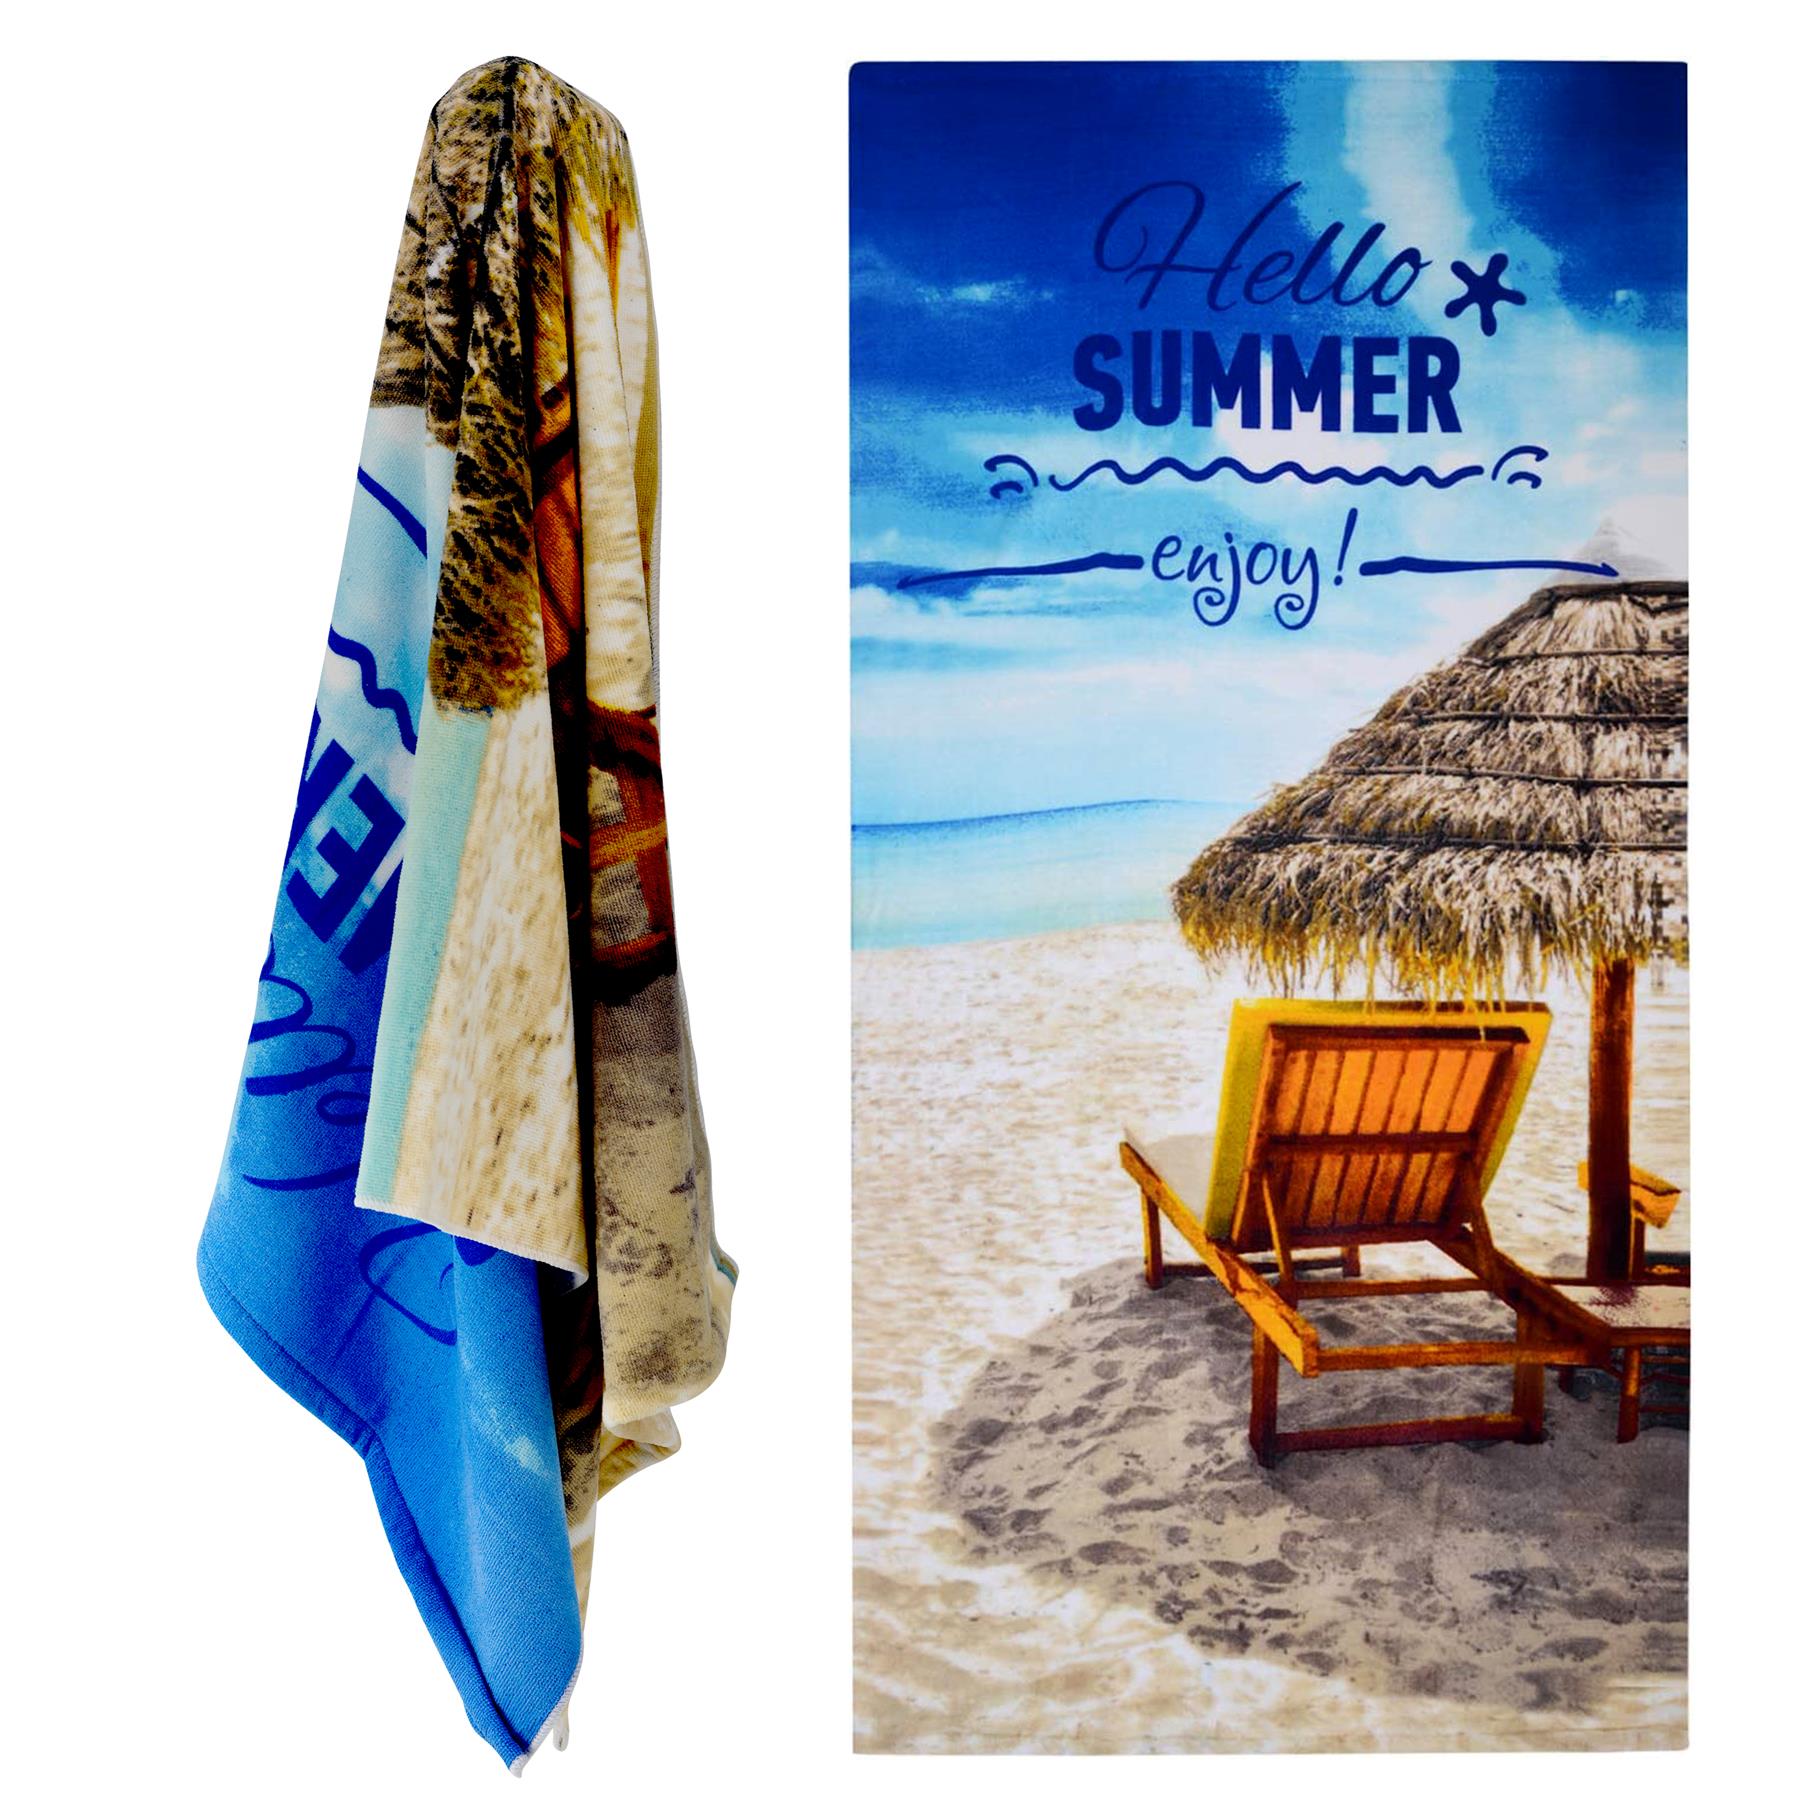 Hello Summer Design Large Towel by Geezy - UKBuyZone